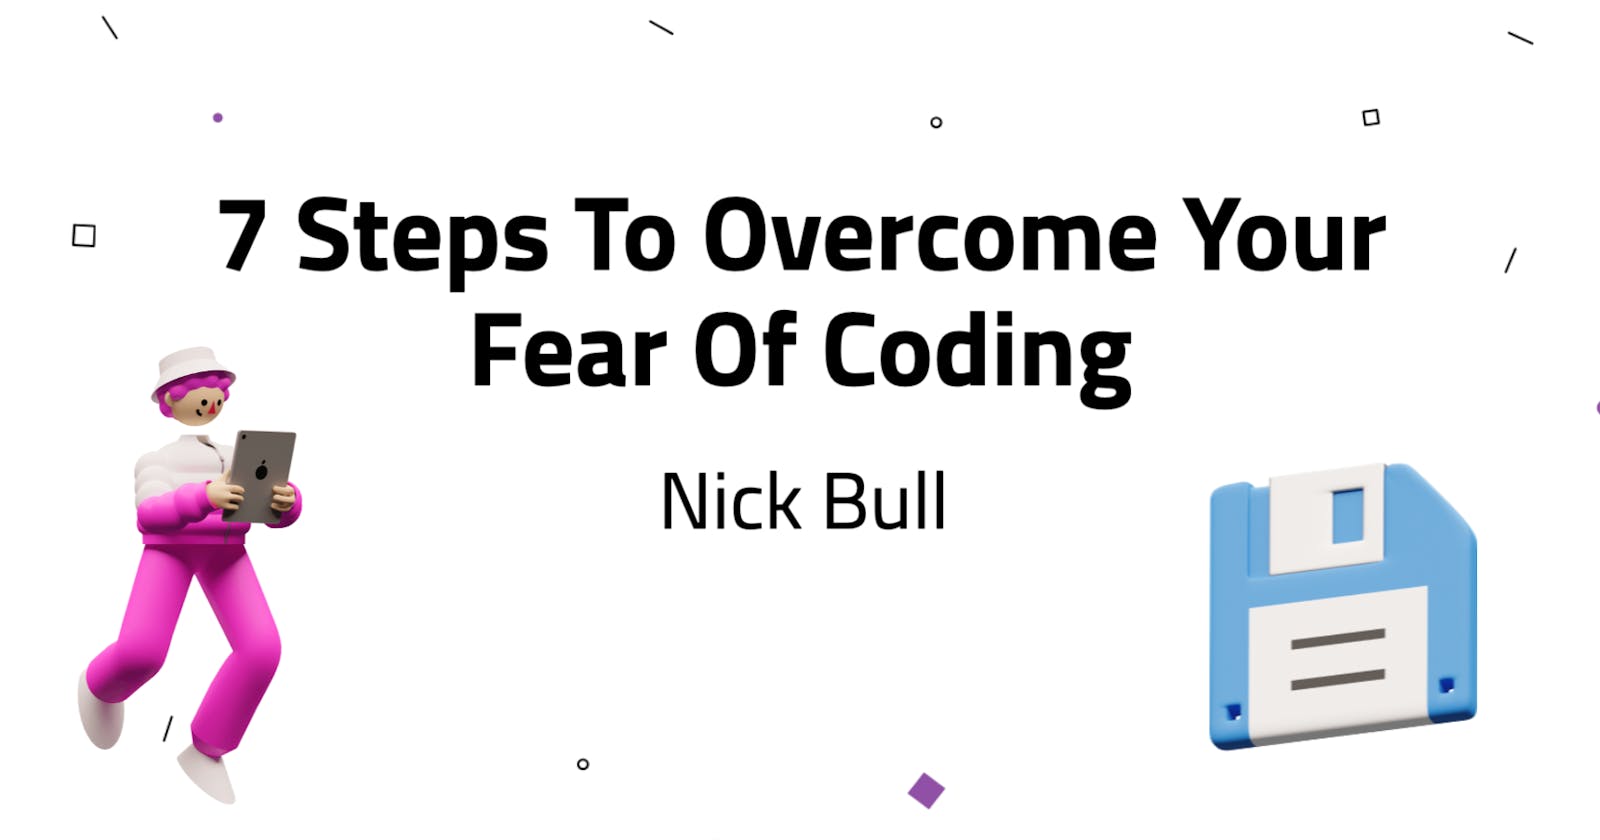 7 Steps To Overcome Your Fear Of Coding